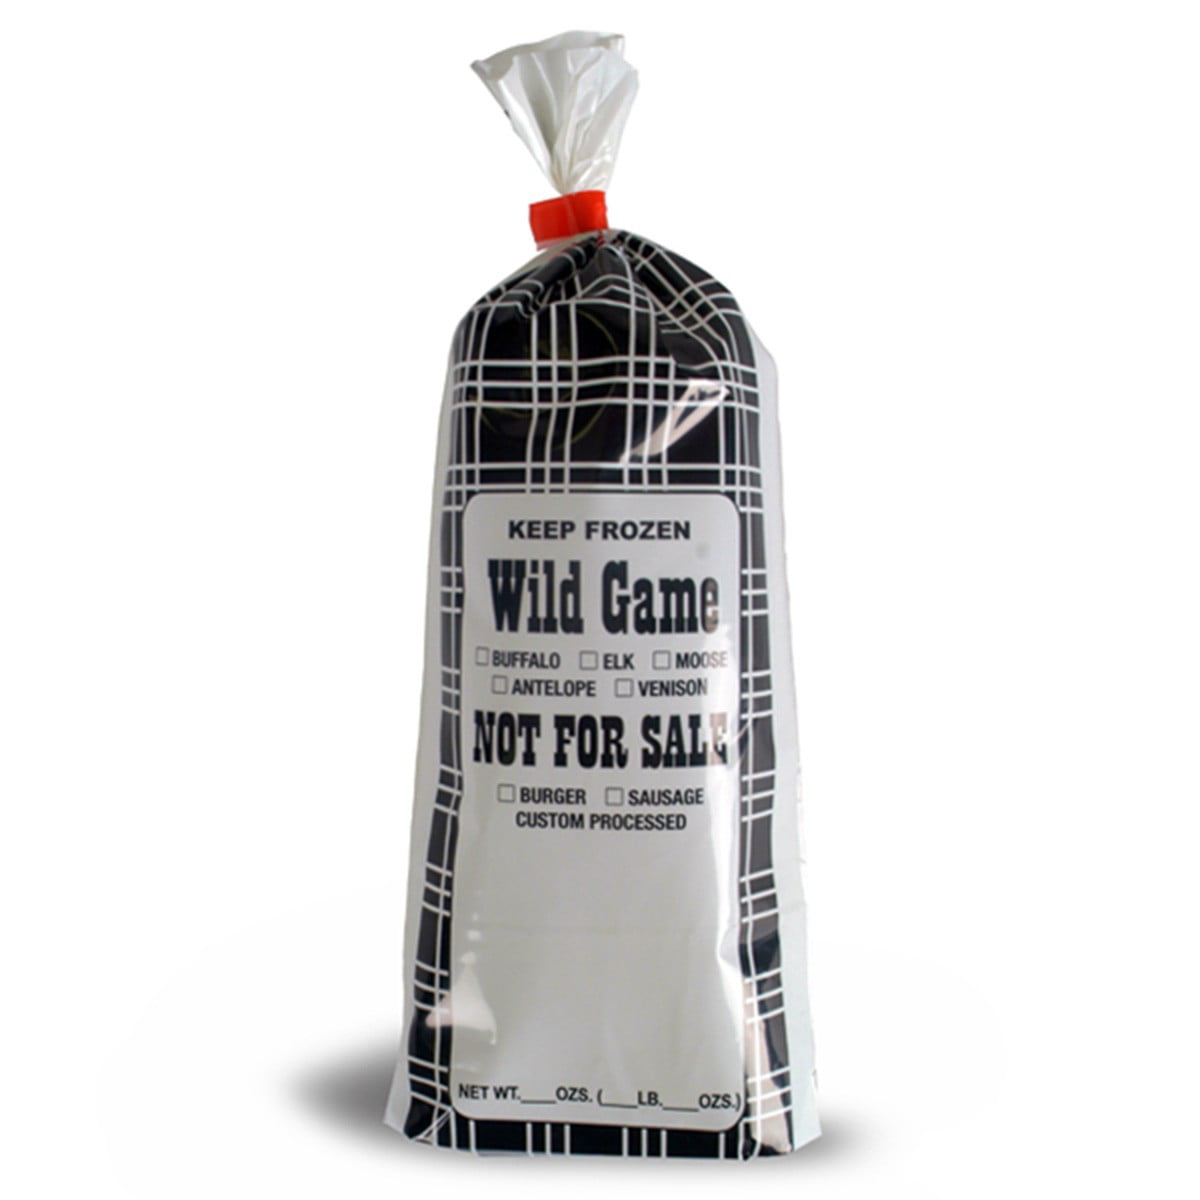 1LB Wild Game - Not for Sale (Black Check) 